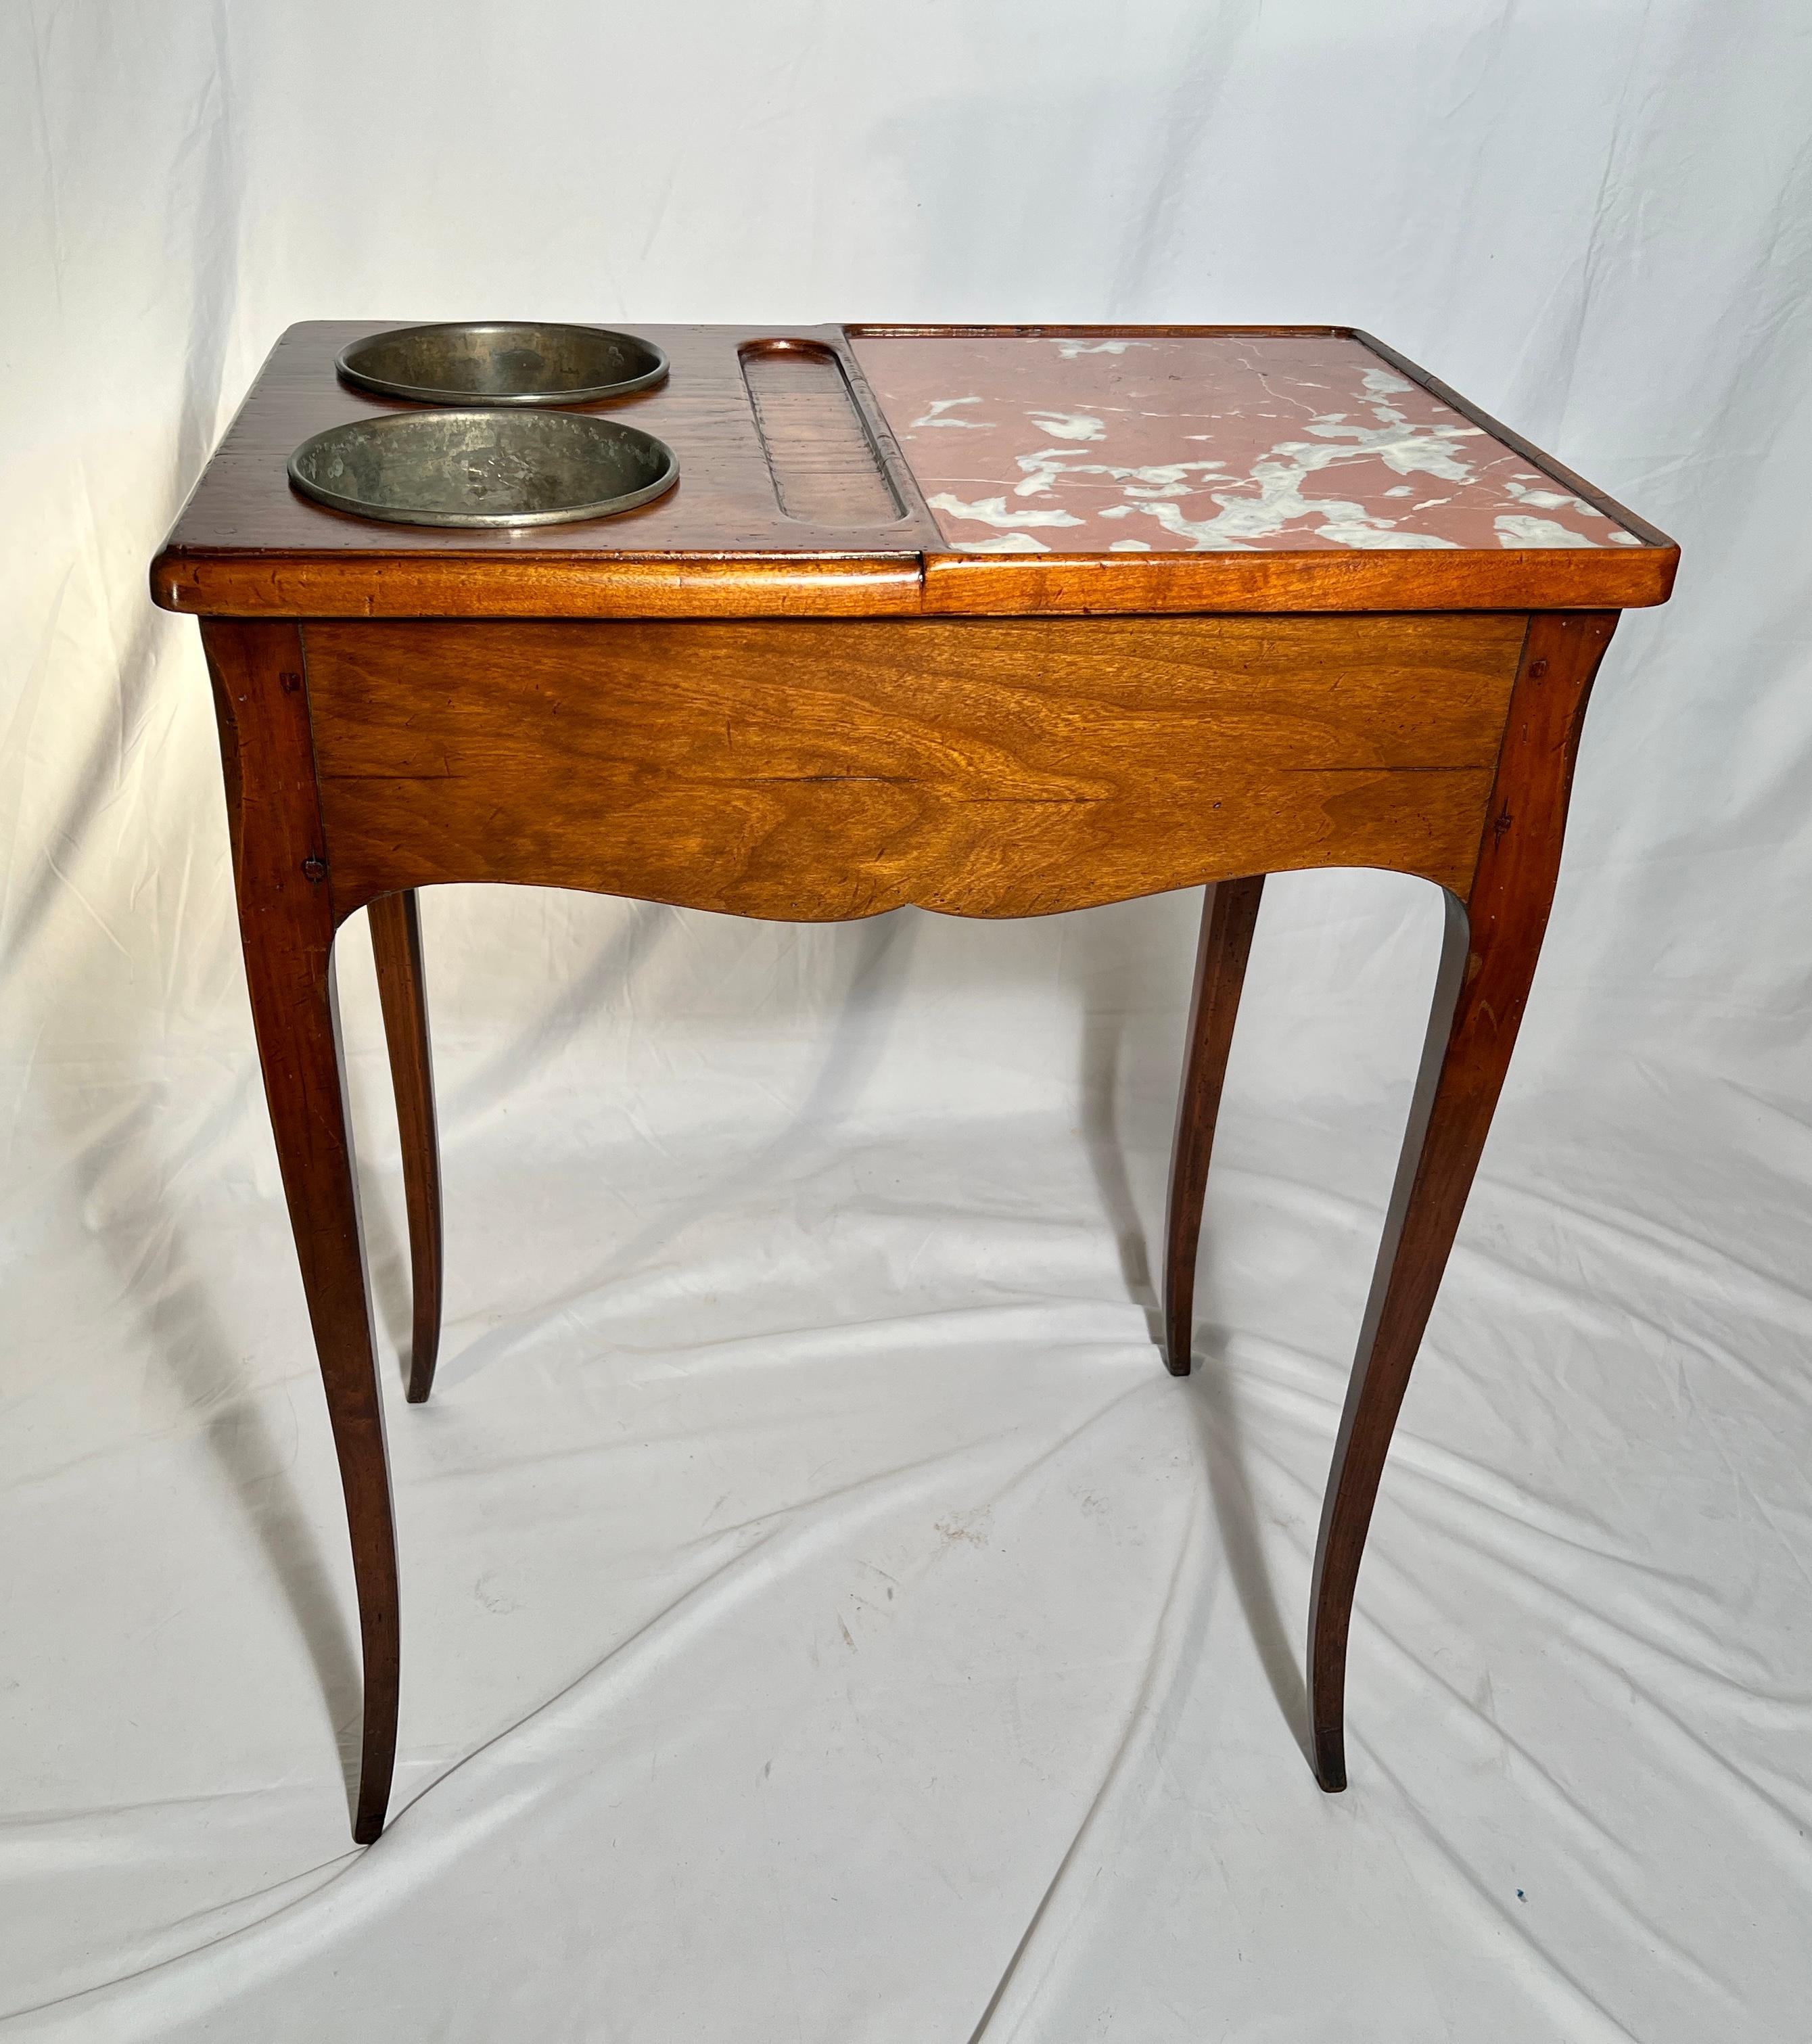 Antique French Walnut & Marble Rafraîchissoir Wine Table with Coolers, Circa 1900.